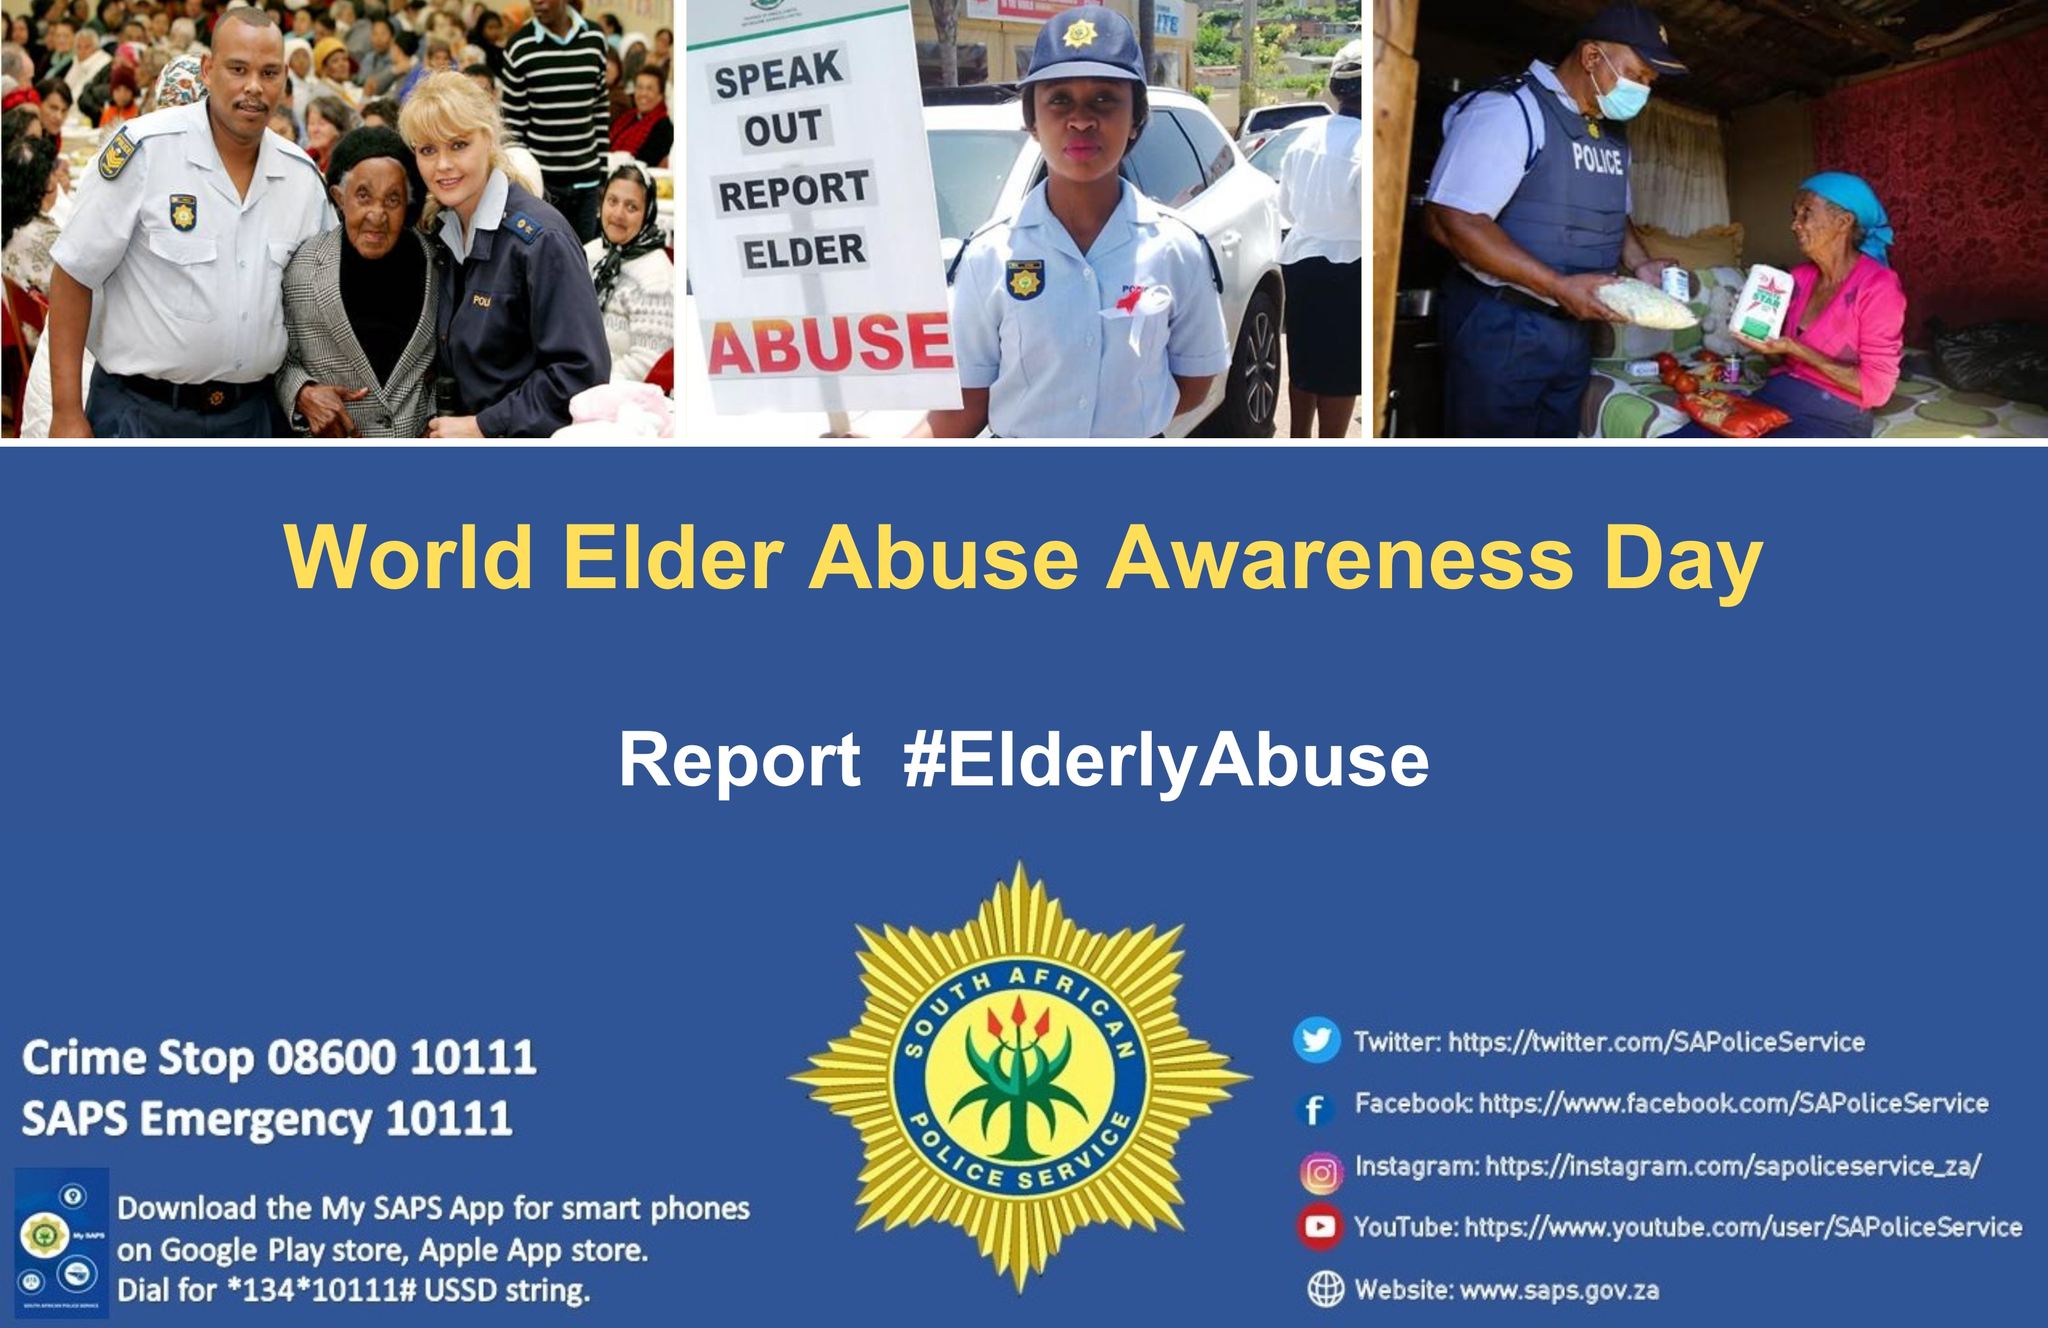 Today is World Elder Abuse Awareness Day